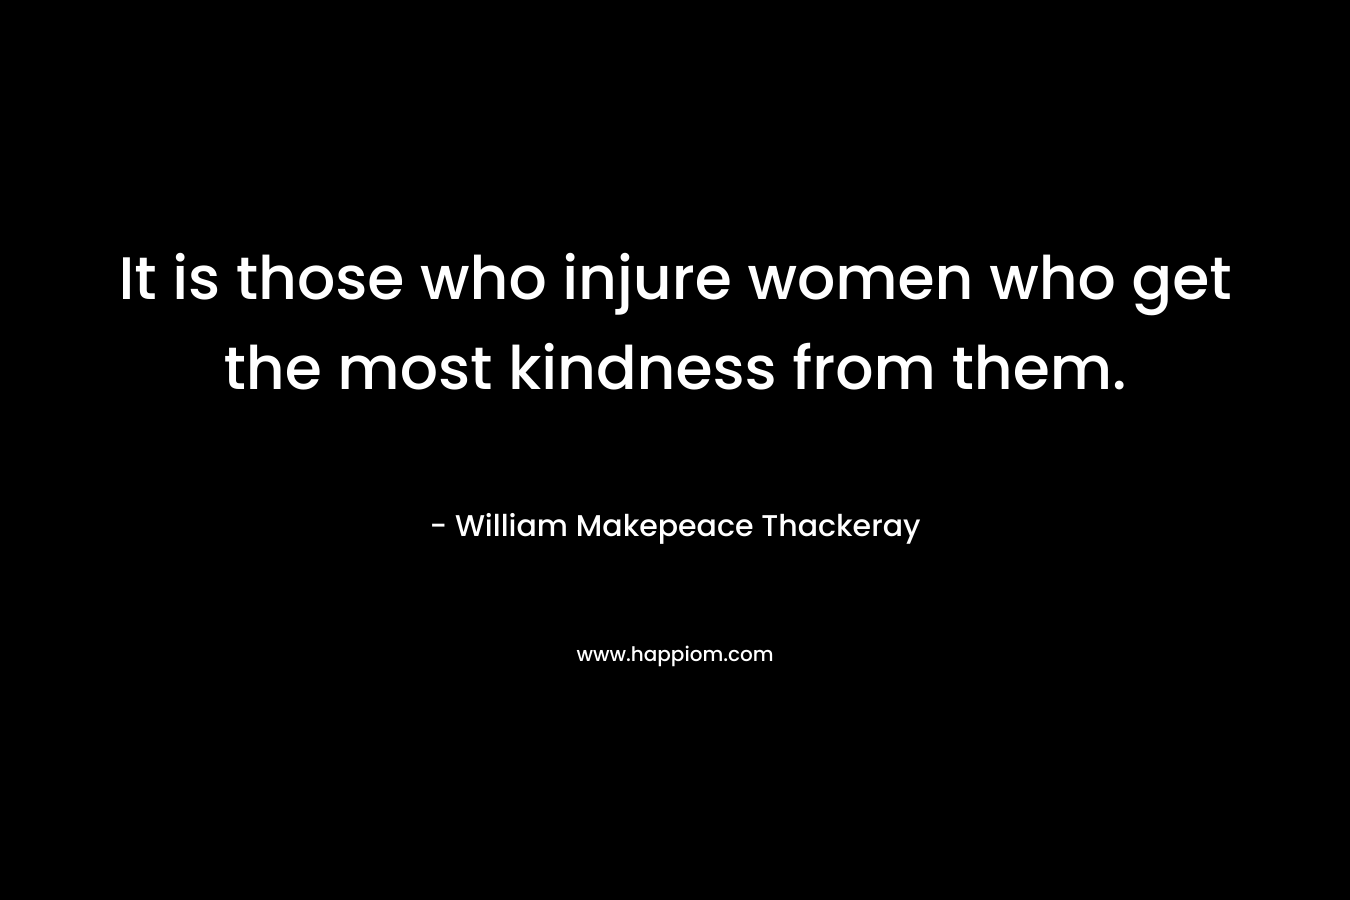 It is those who injure women who get the most kindness from them.